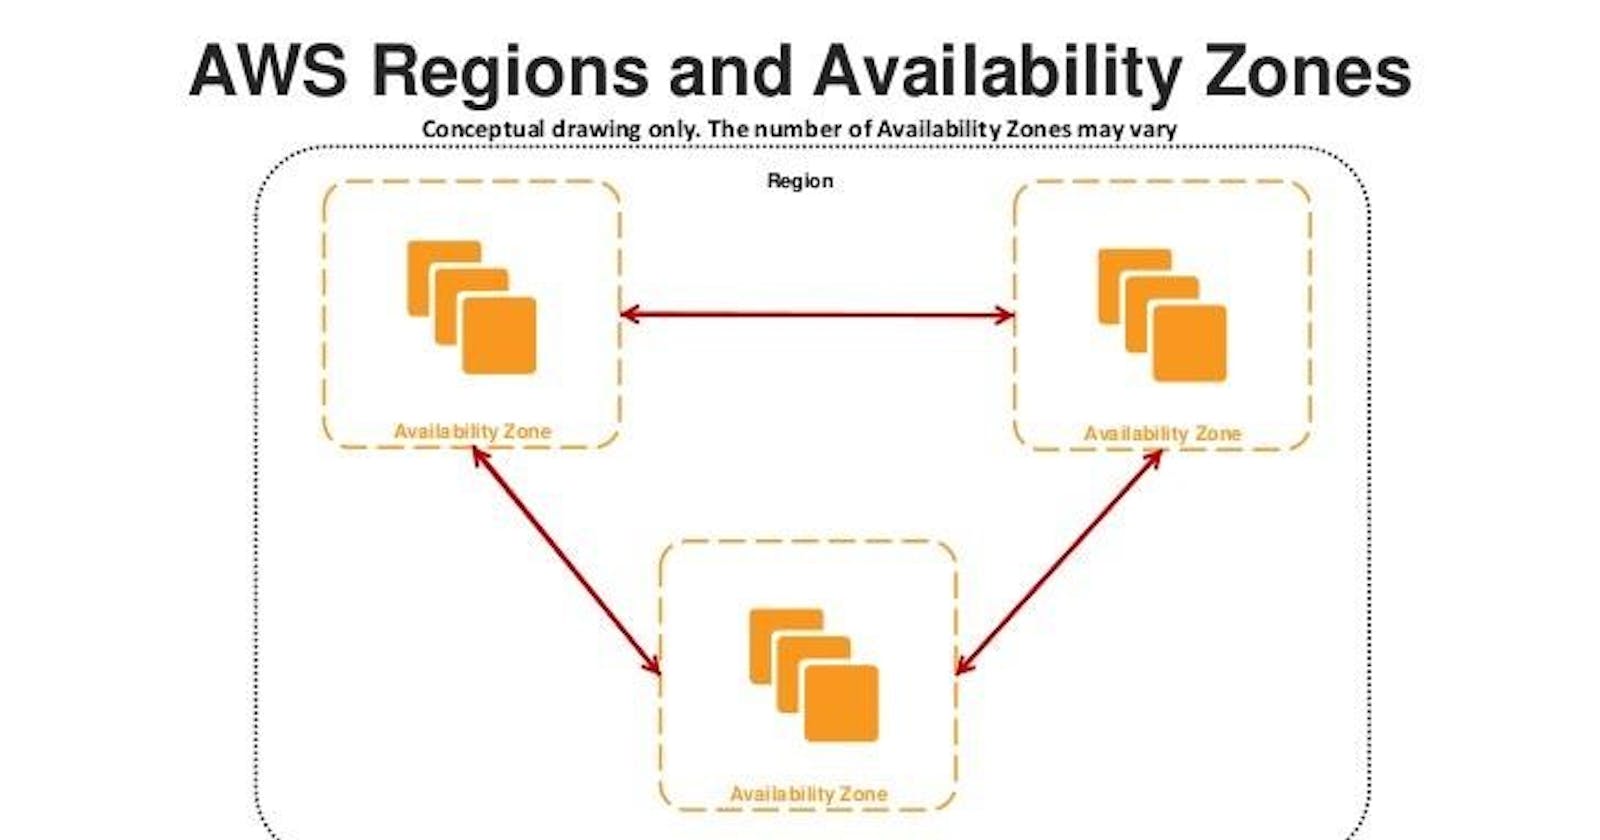 Regions and Availability Zones (AWS Day 5)